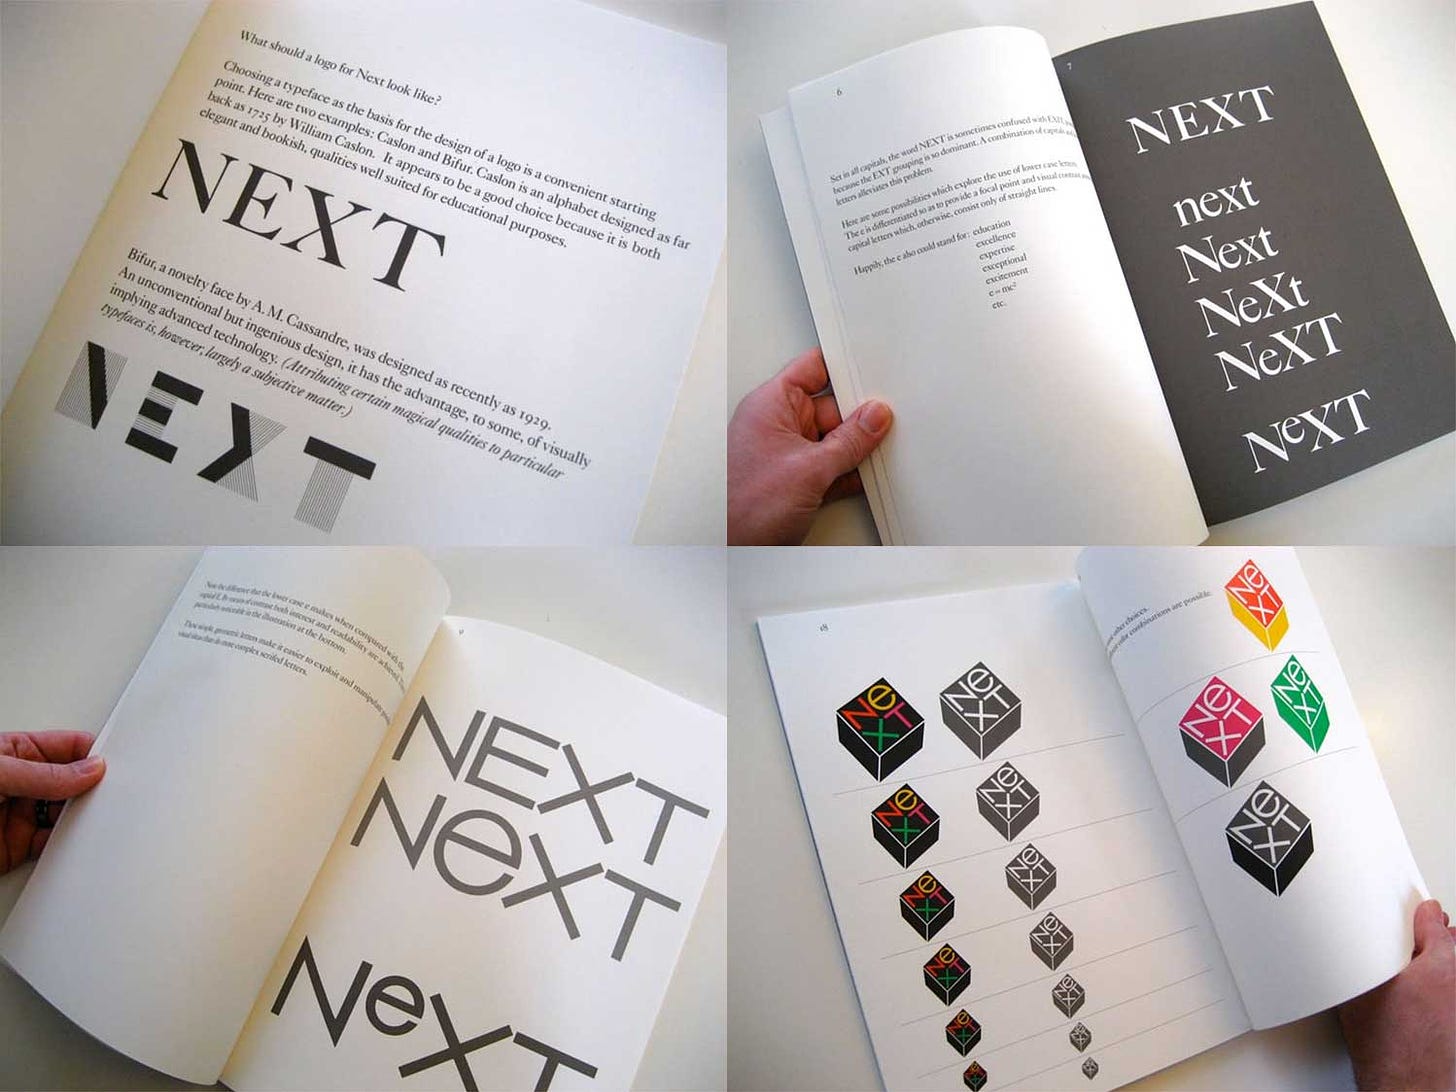 Four spreads from the NeXT logo booklet delivered to Steve Jobs showing different configurations of text and the logo at various sizes, in color and in black & white.